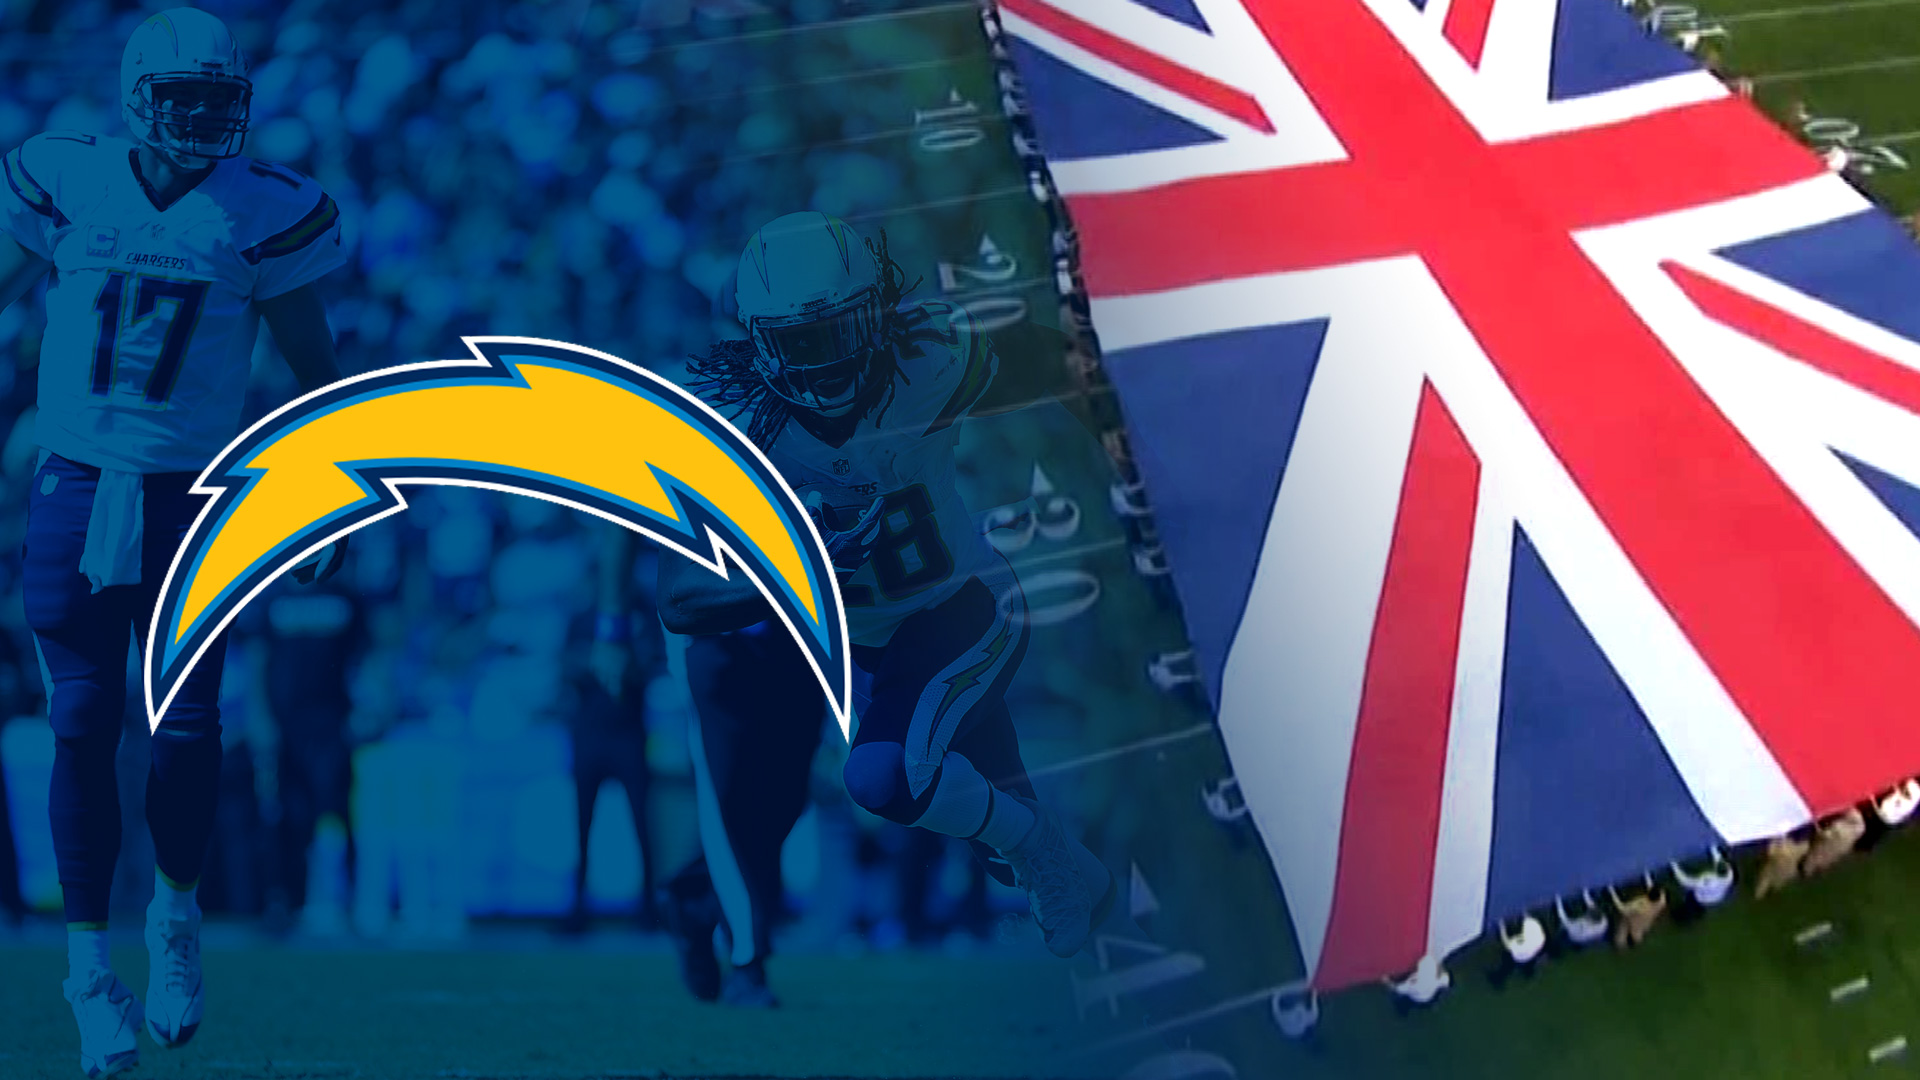 According to a report in the Athletic, the Chargers would at least "listen" to the NFL if they asked them to permanently relocate to London.